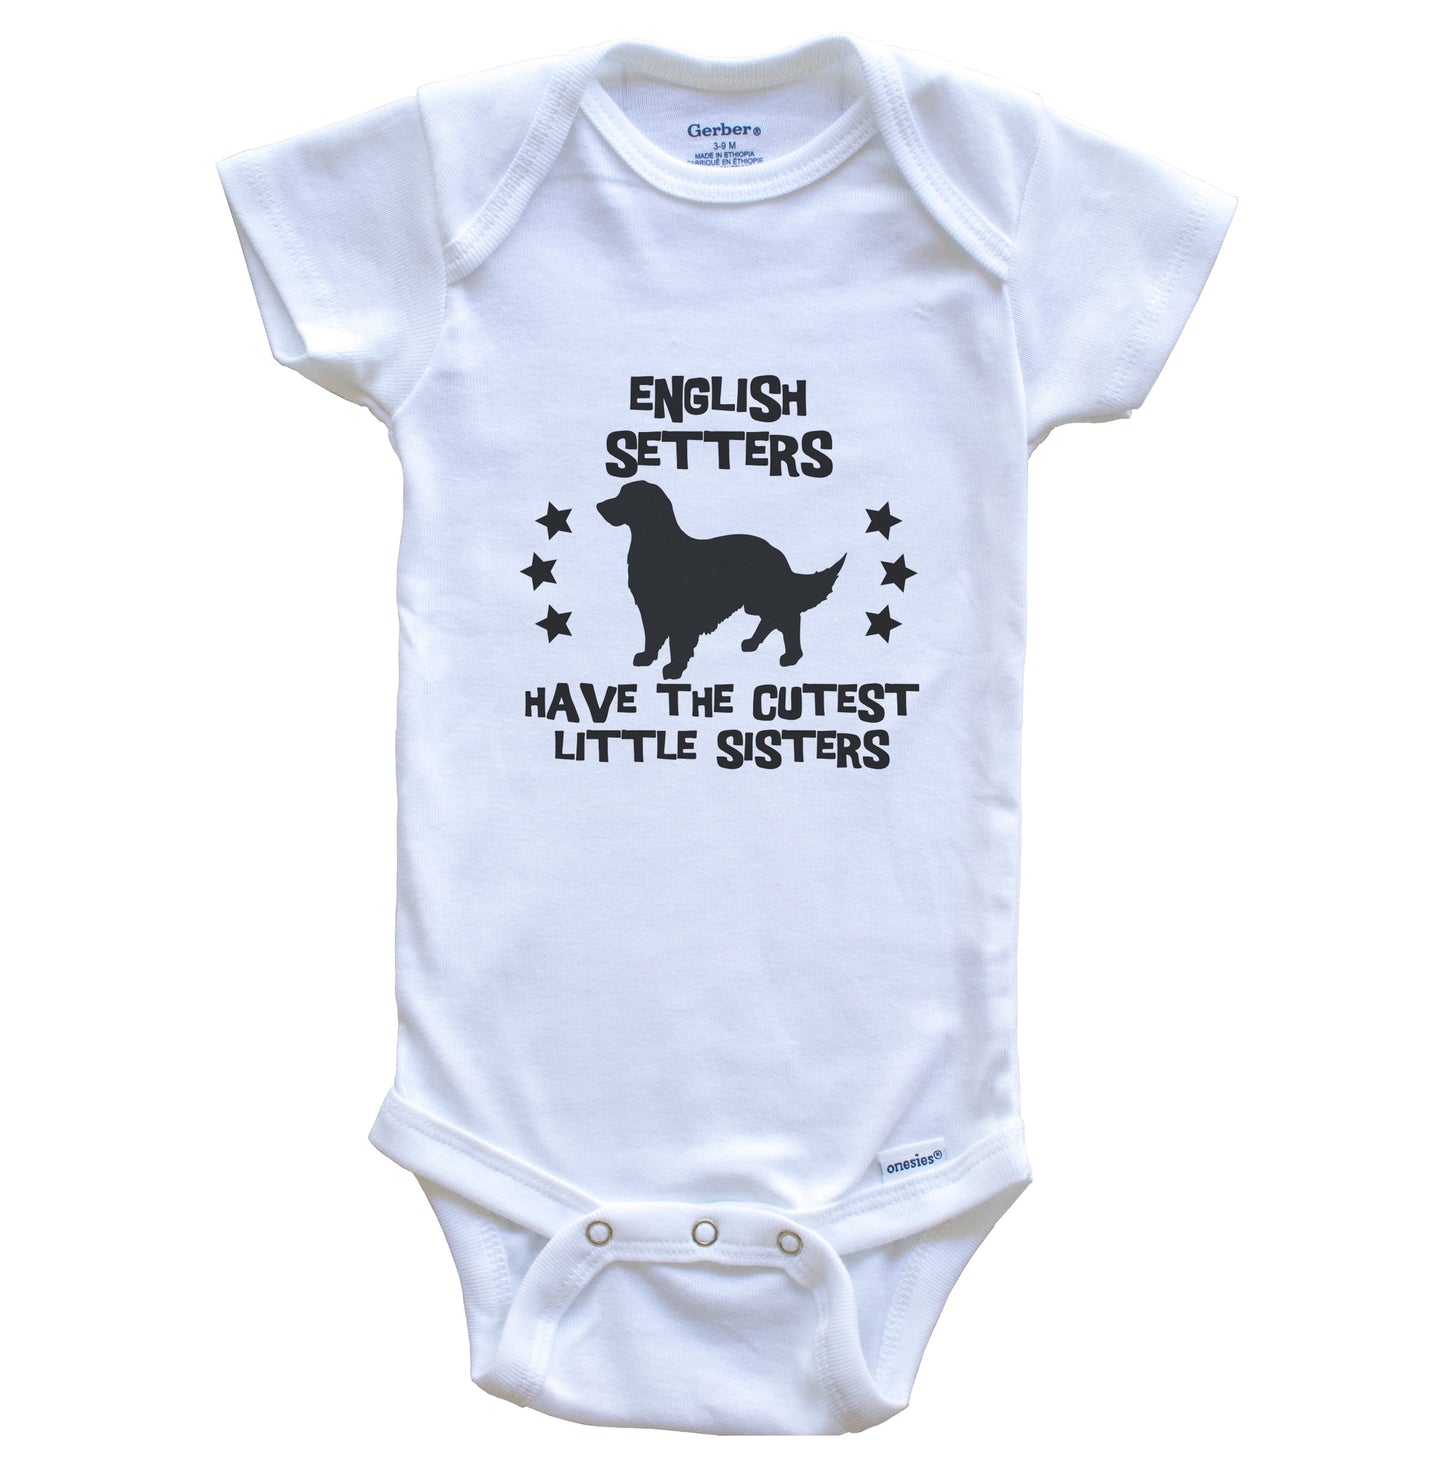 English Setters Have The Cutest Little Sisters Funny English Setter Baby Bodysuit